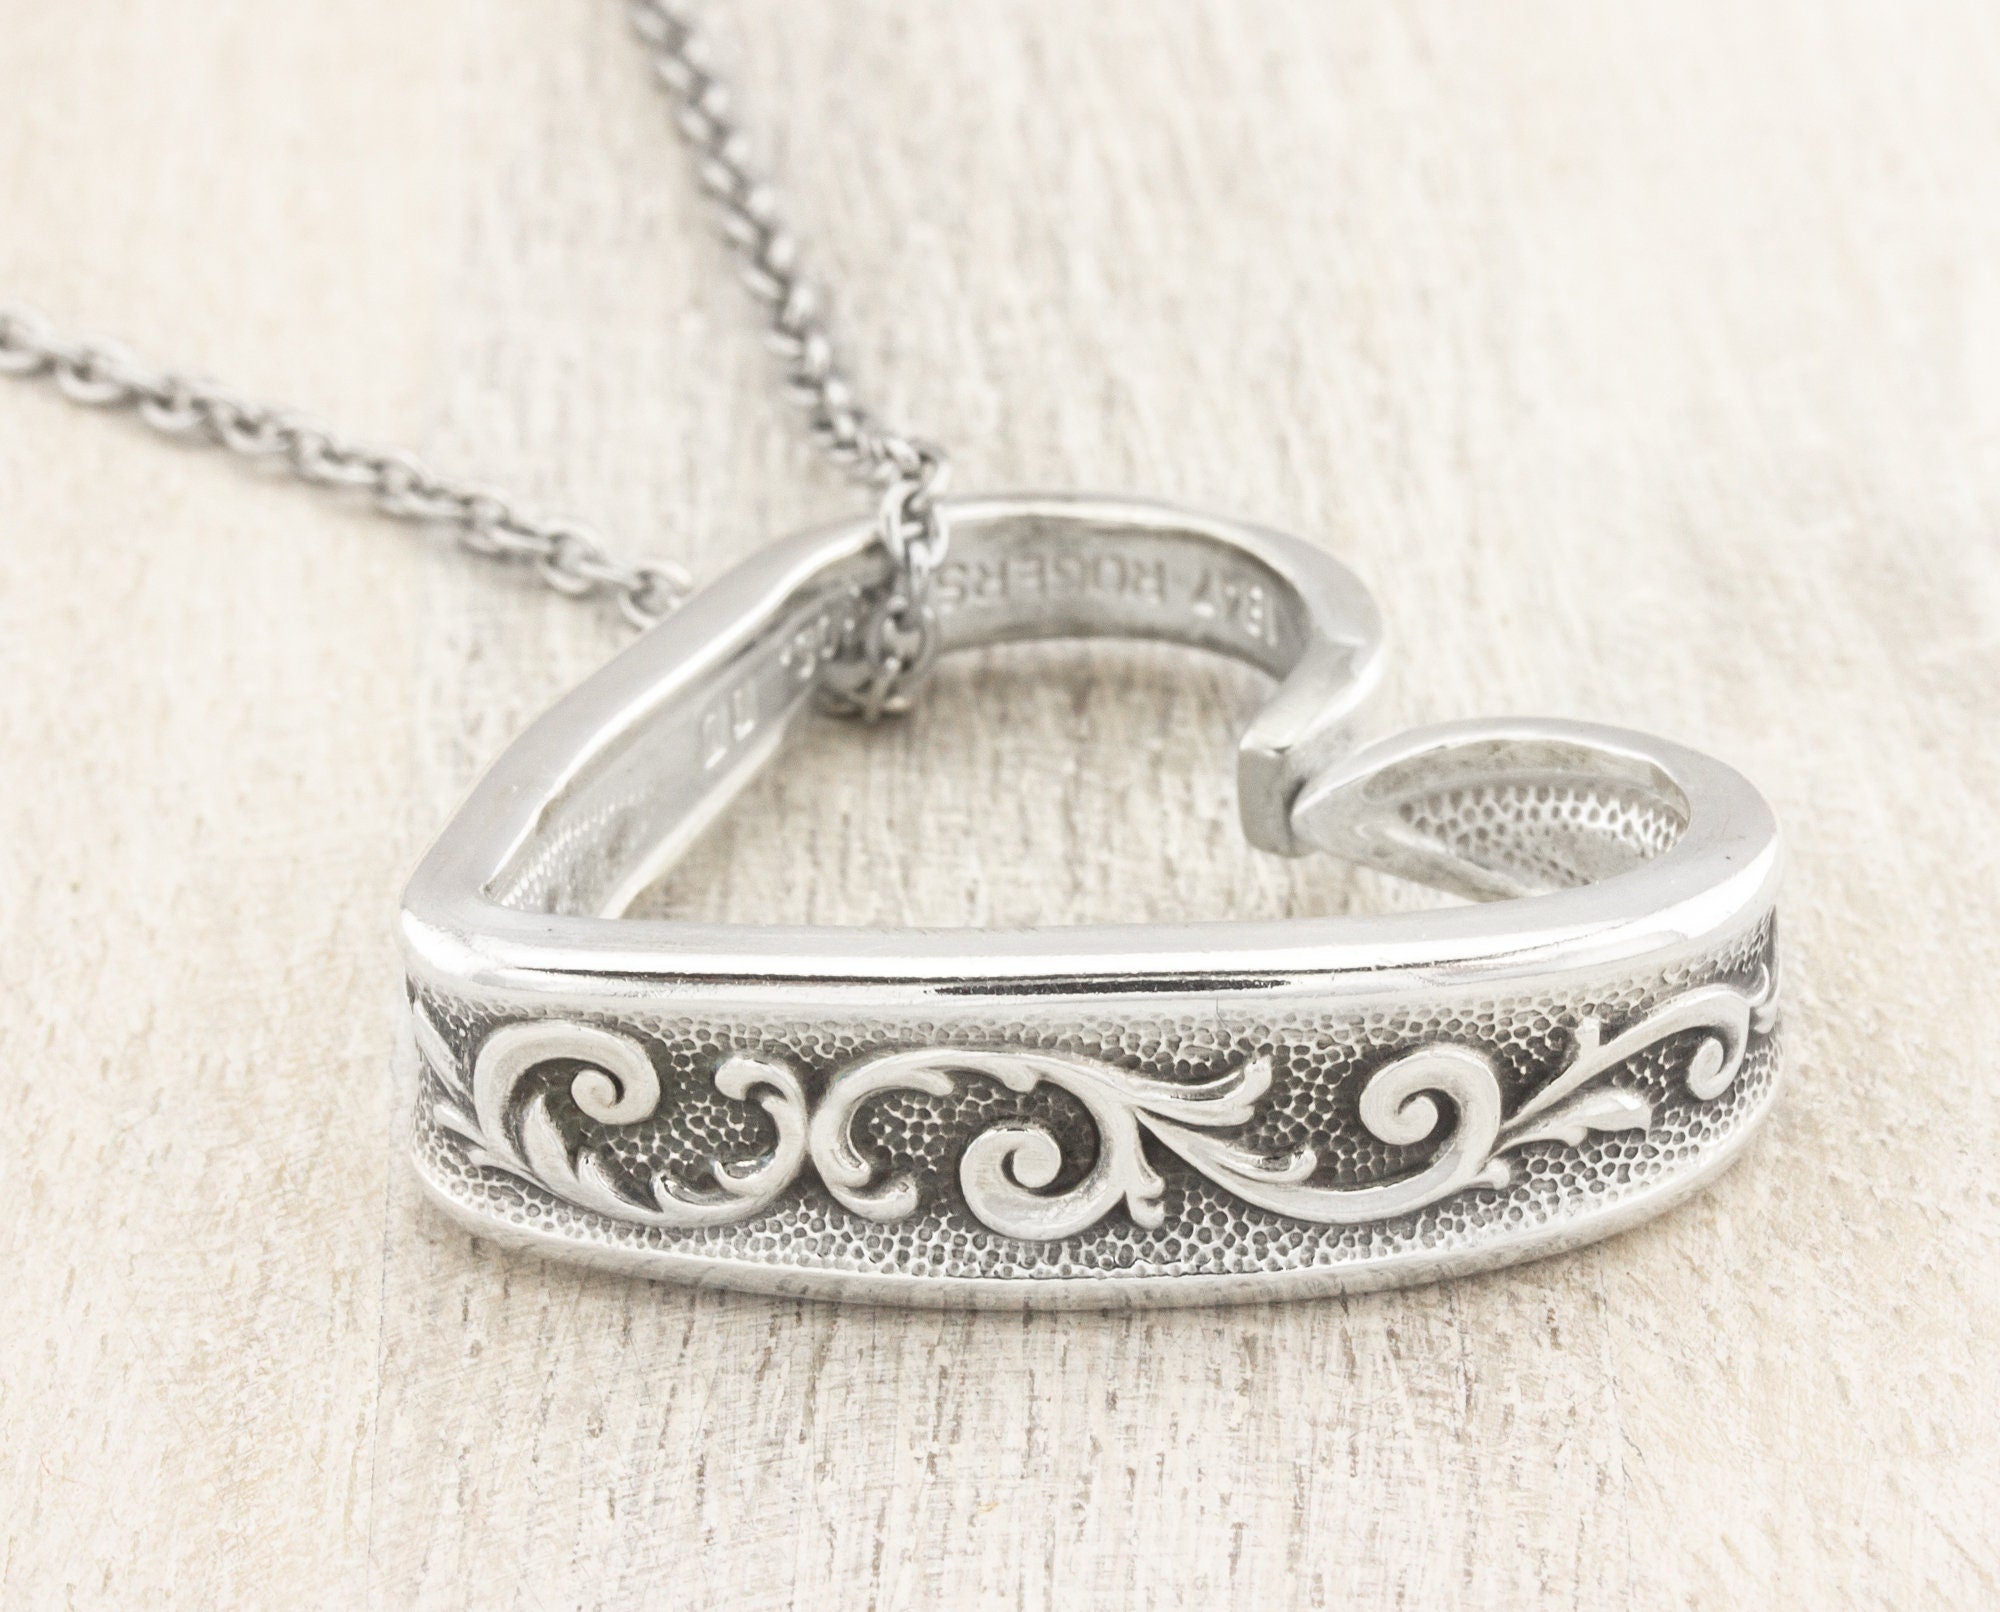 Pendant Necklace made from Vintage Stainless Steel Flatware